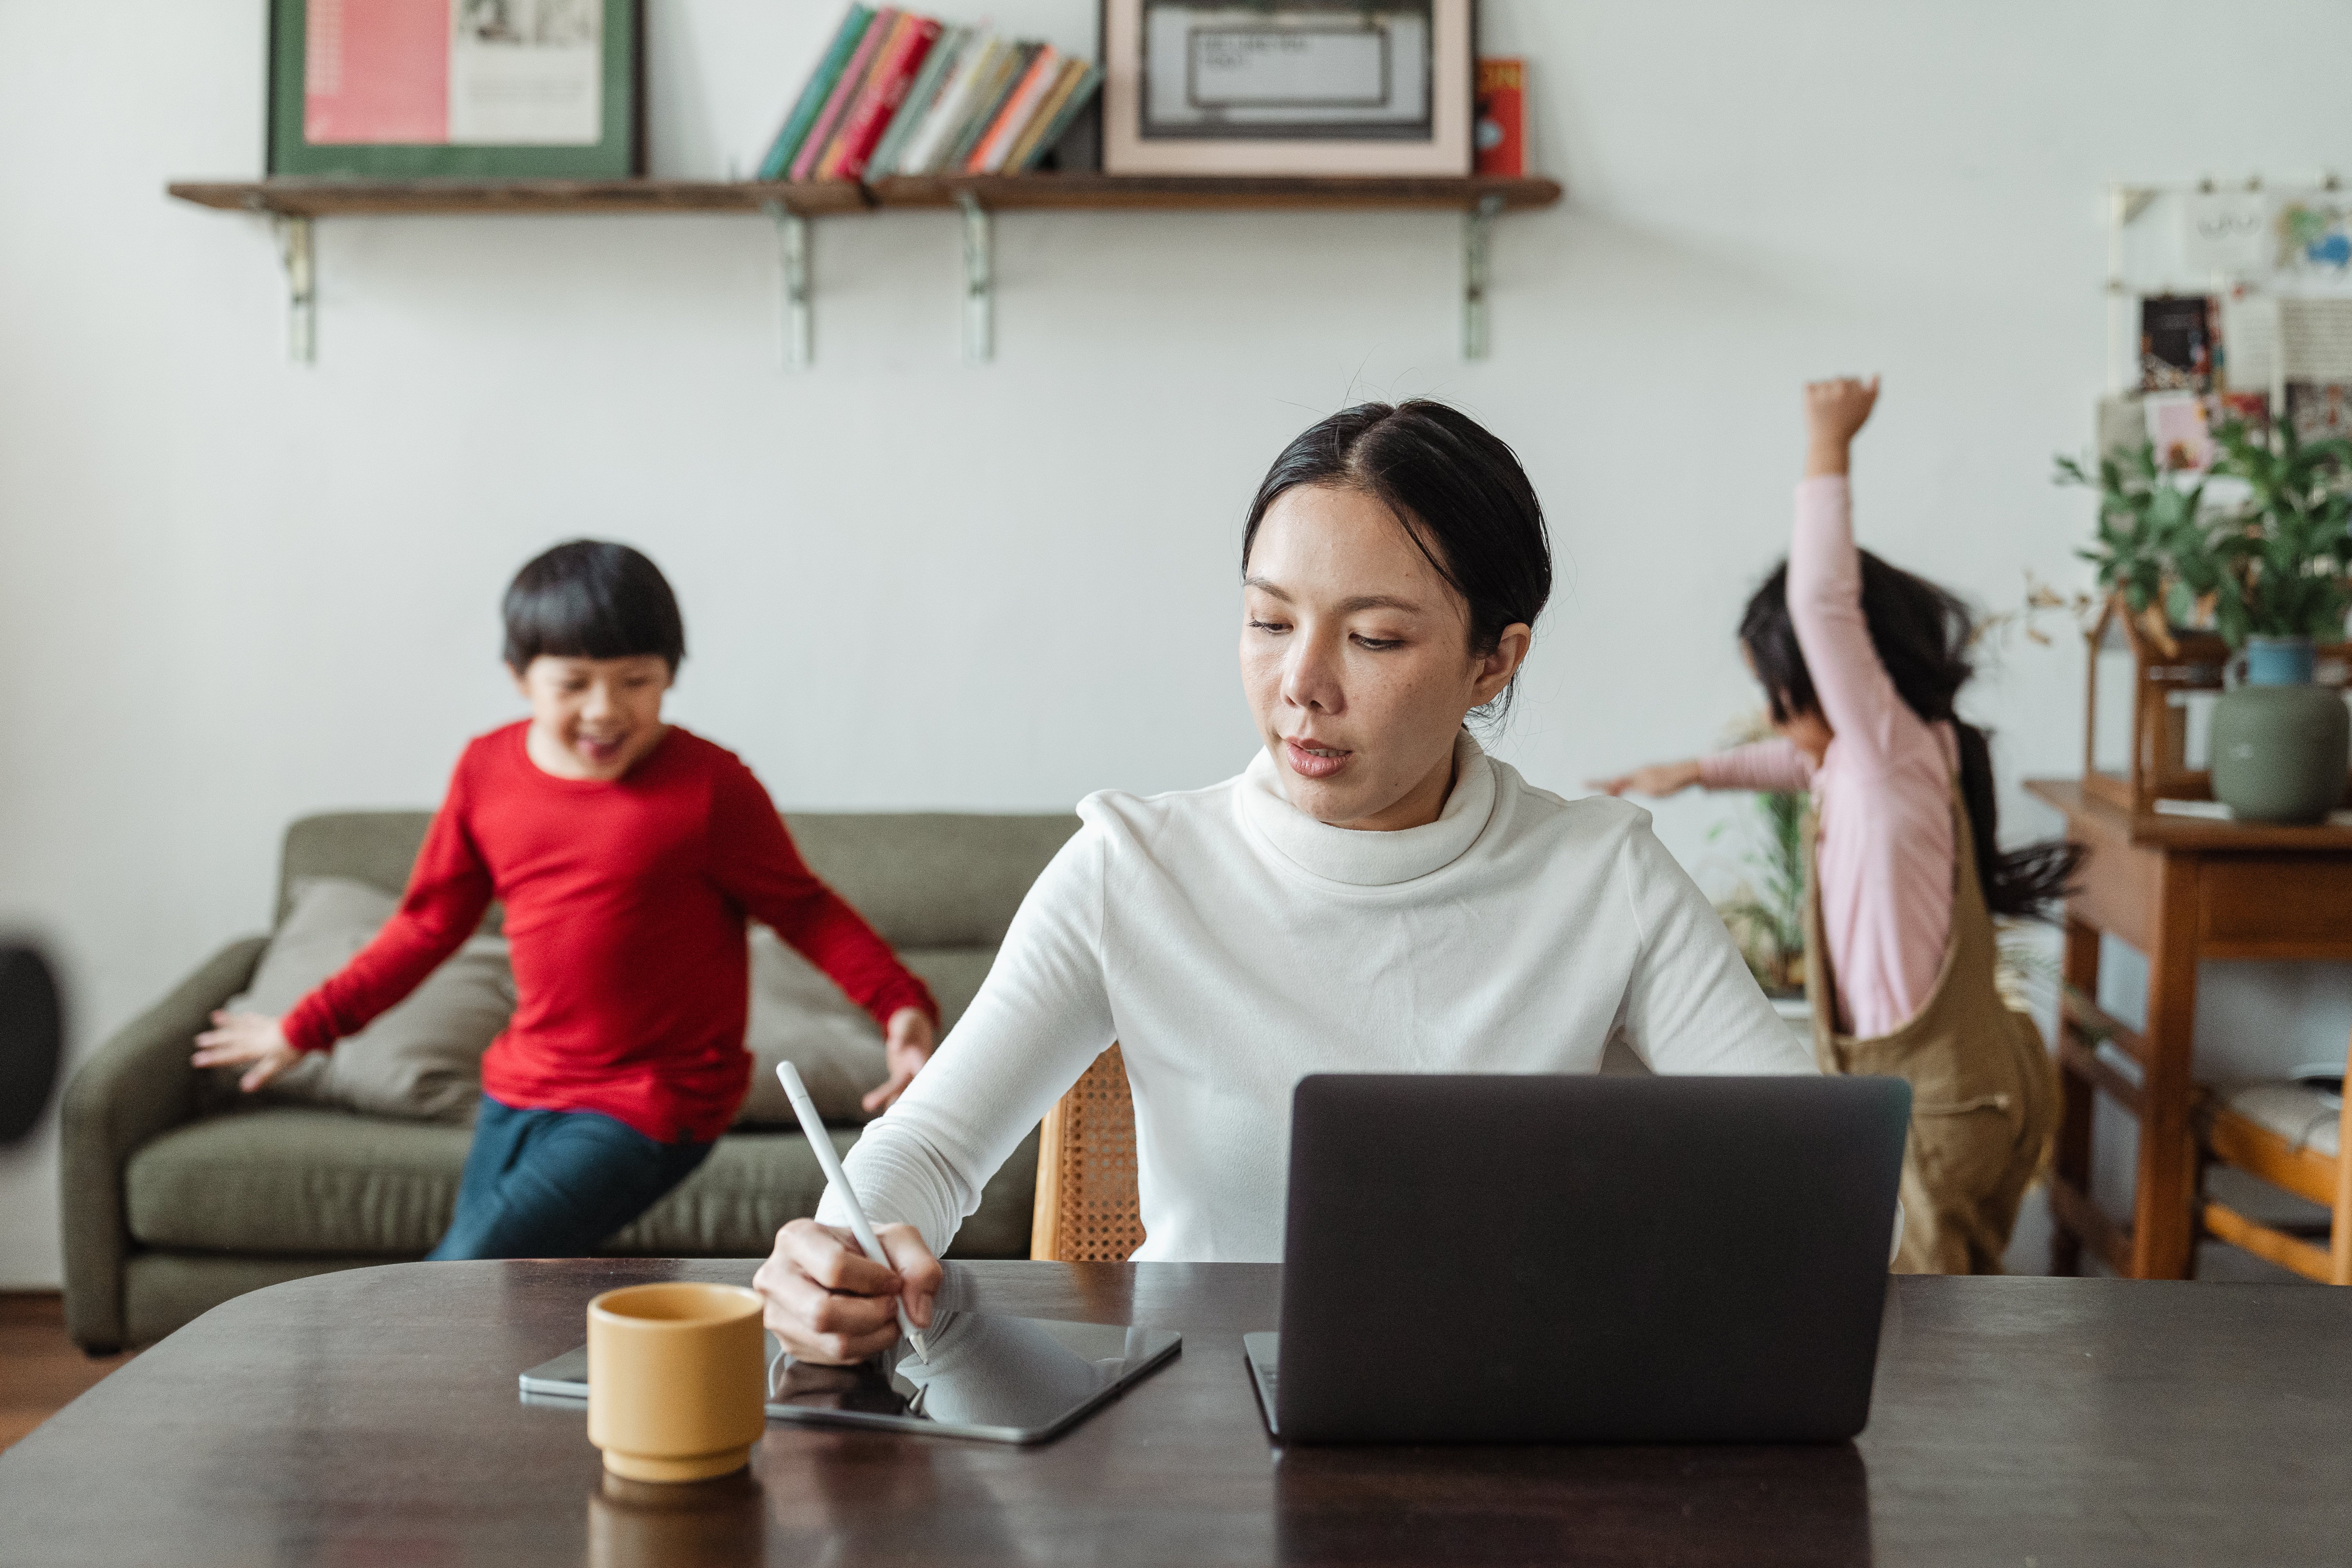 Canva - Busy mom working on laptop and noisy children running around